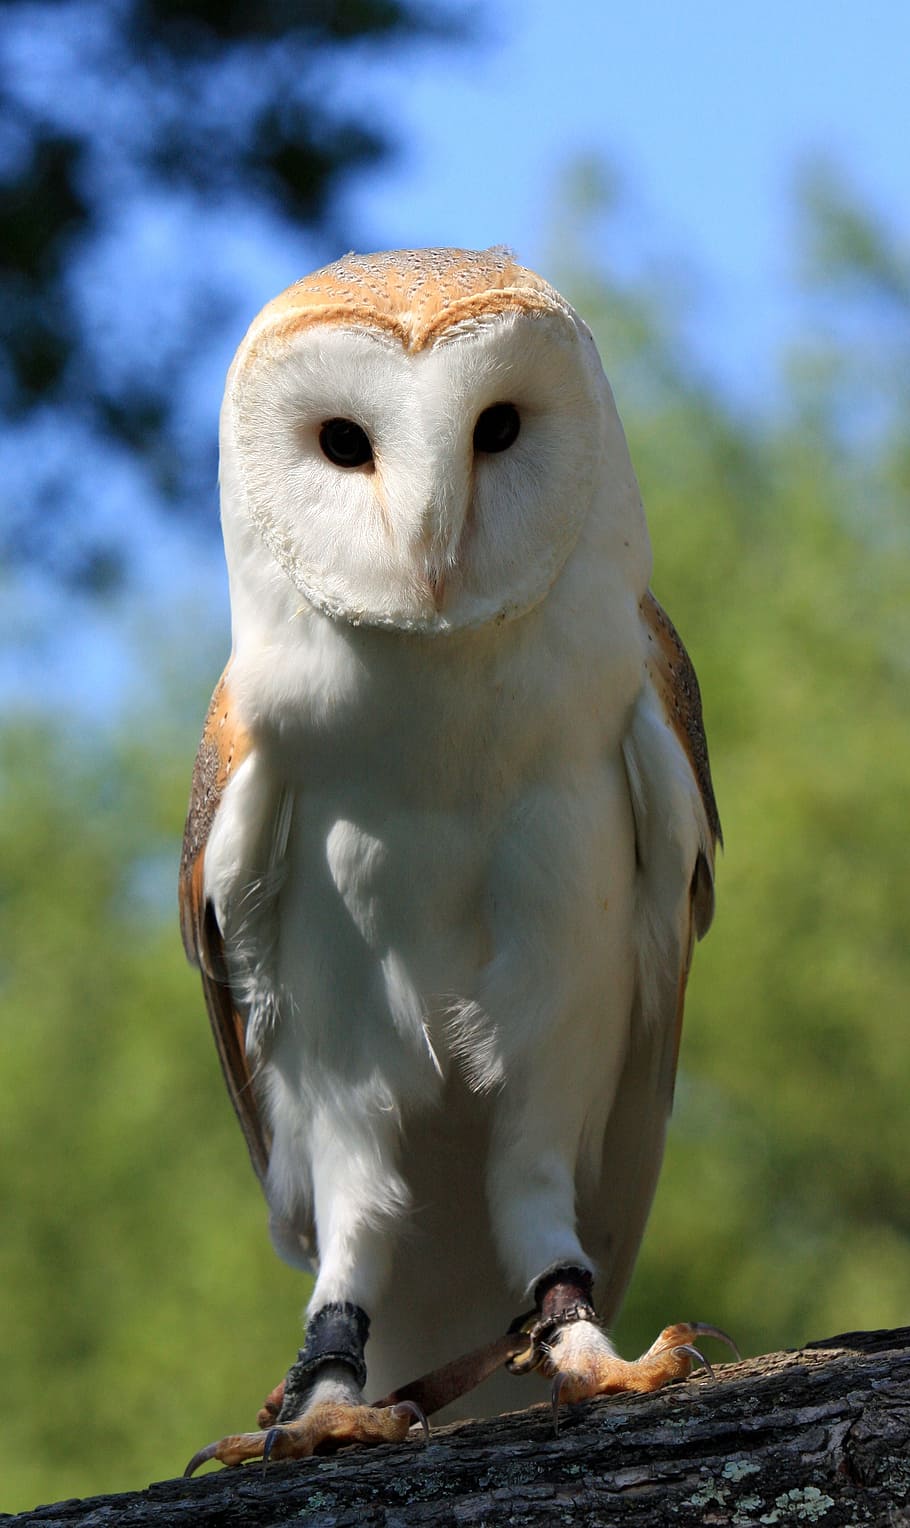 focused photography of white and brown owl, bird, barn owl, close-up